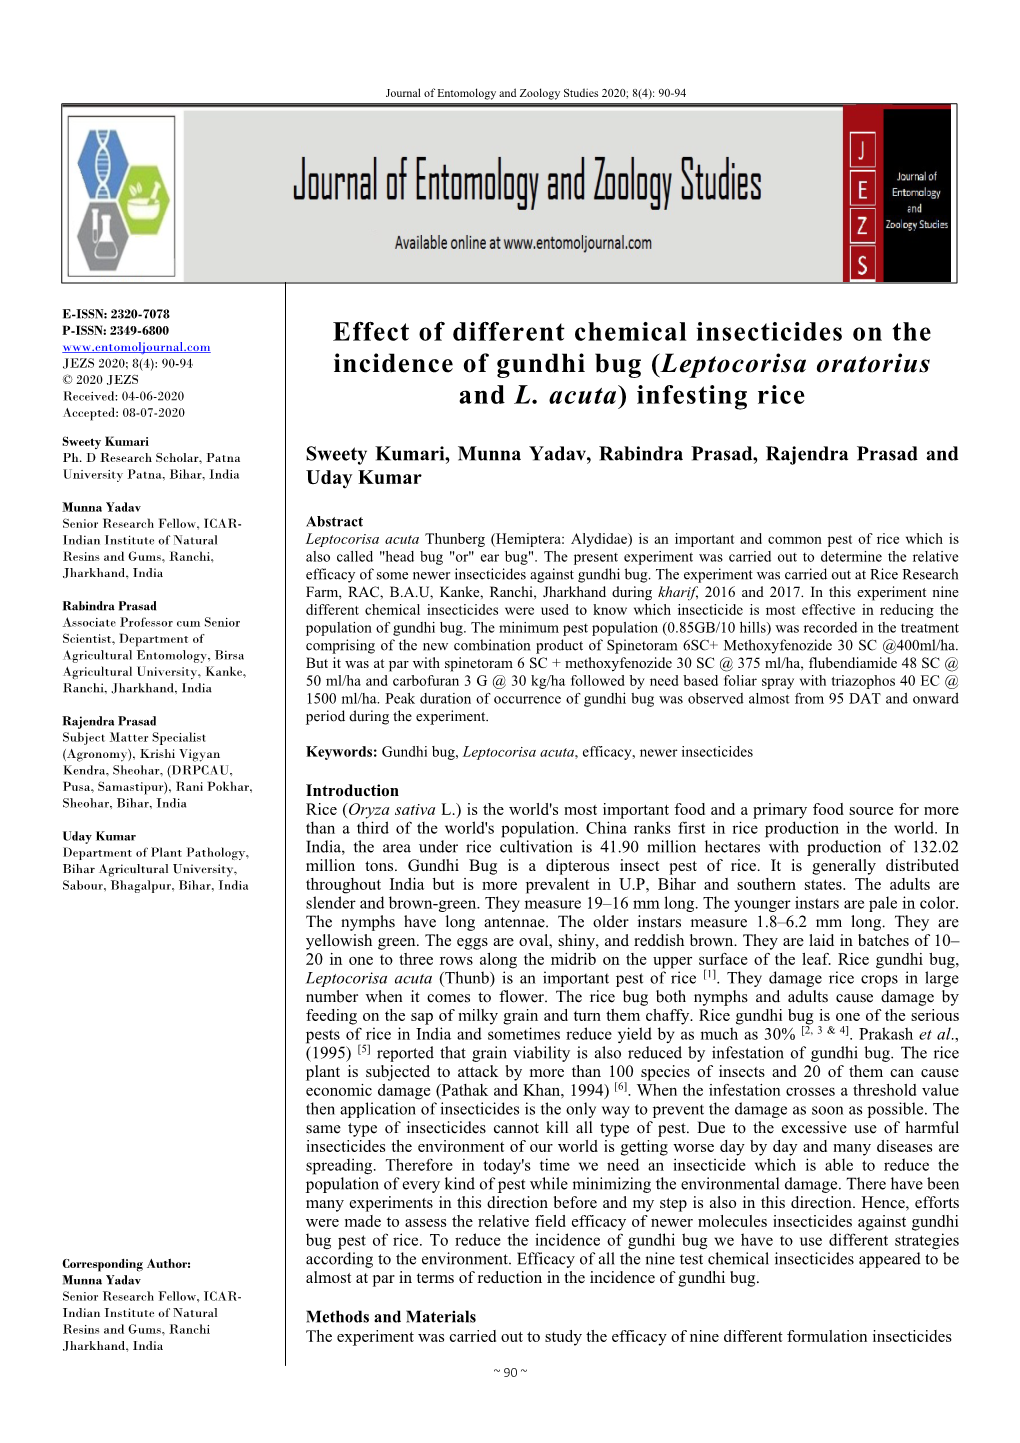 Effect of Different Chemical Insecticides on the Incidence of Gundhi Bug